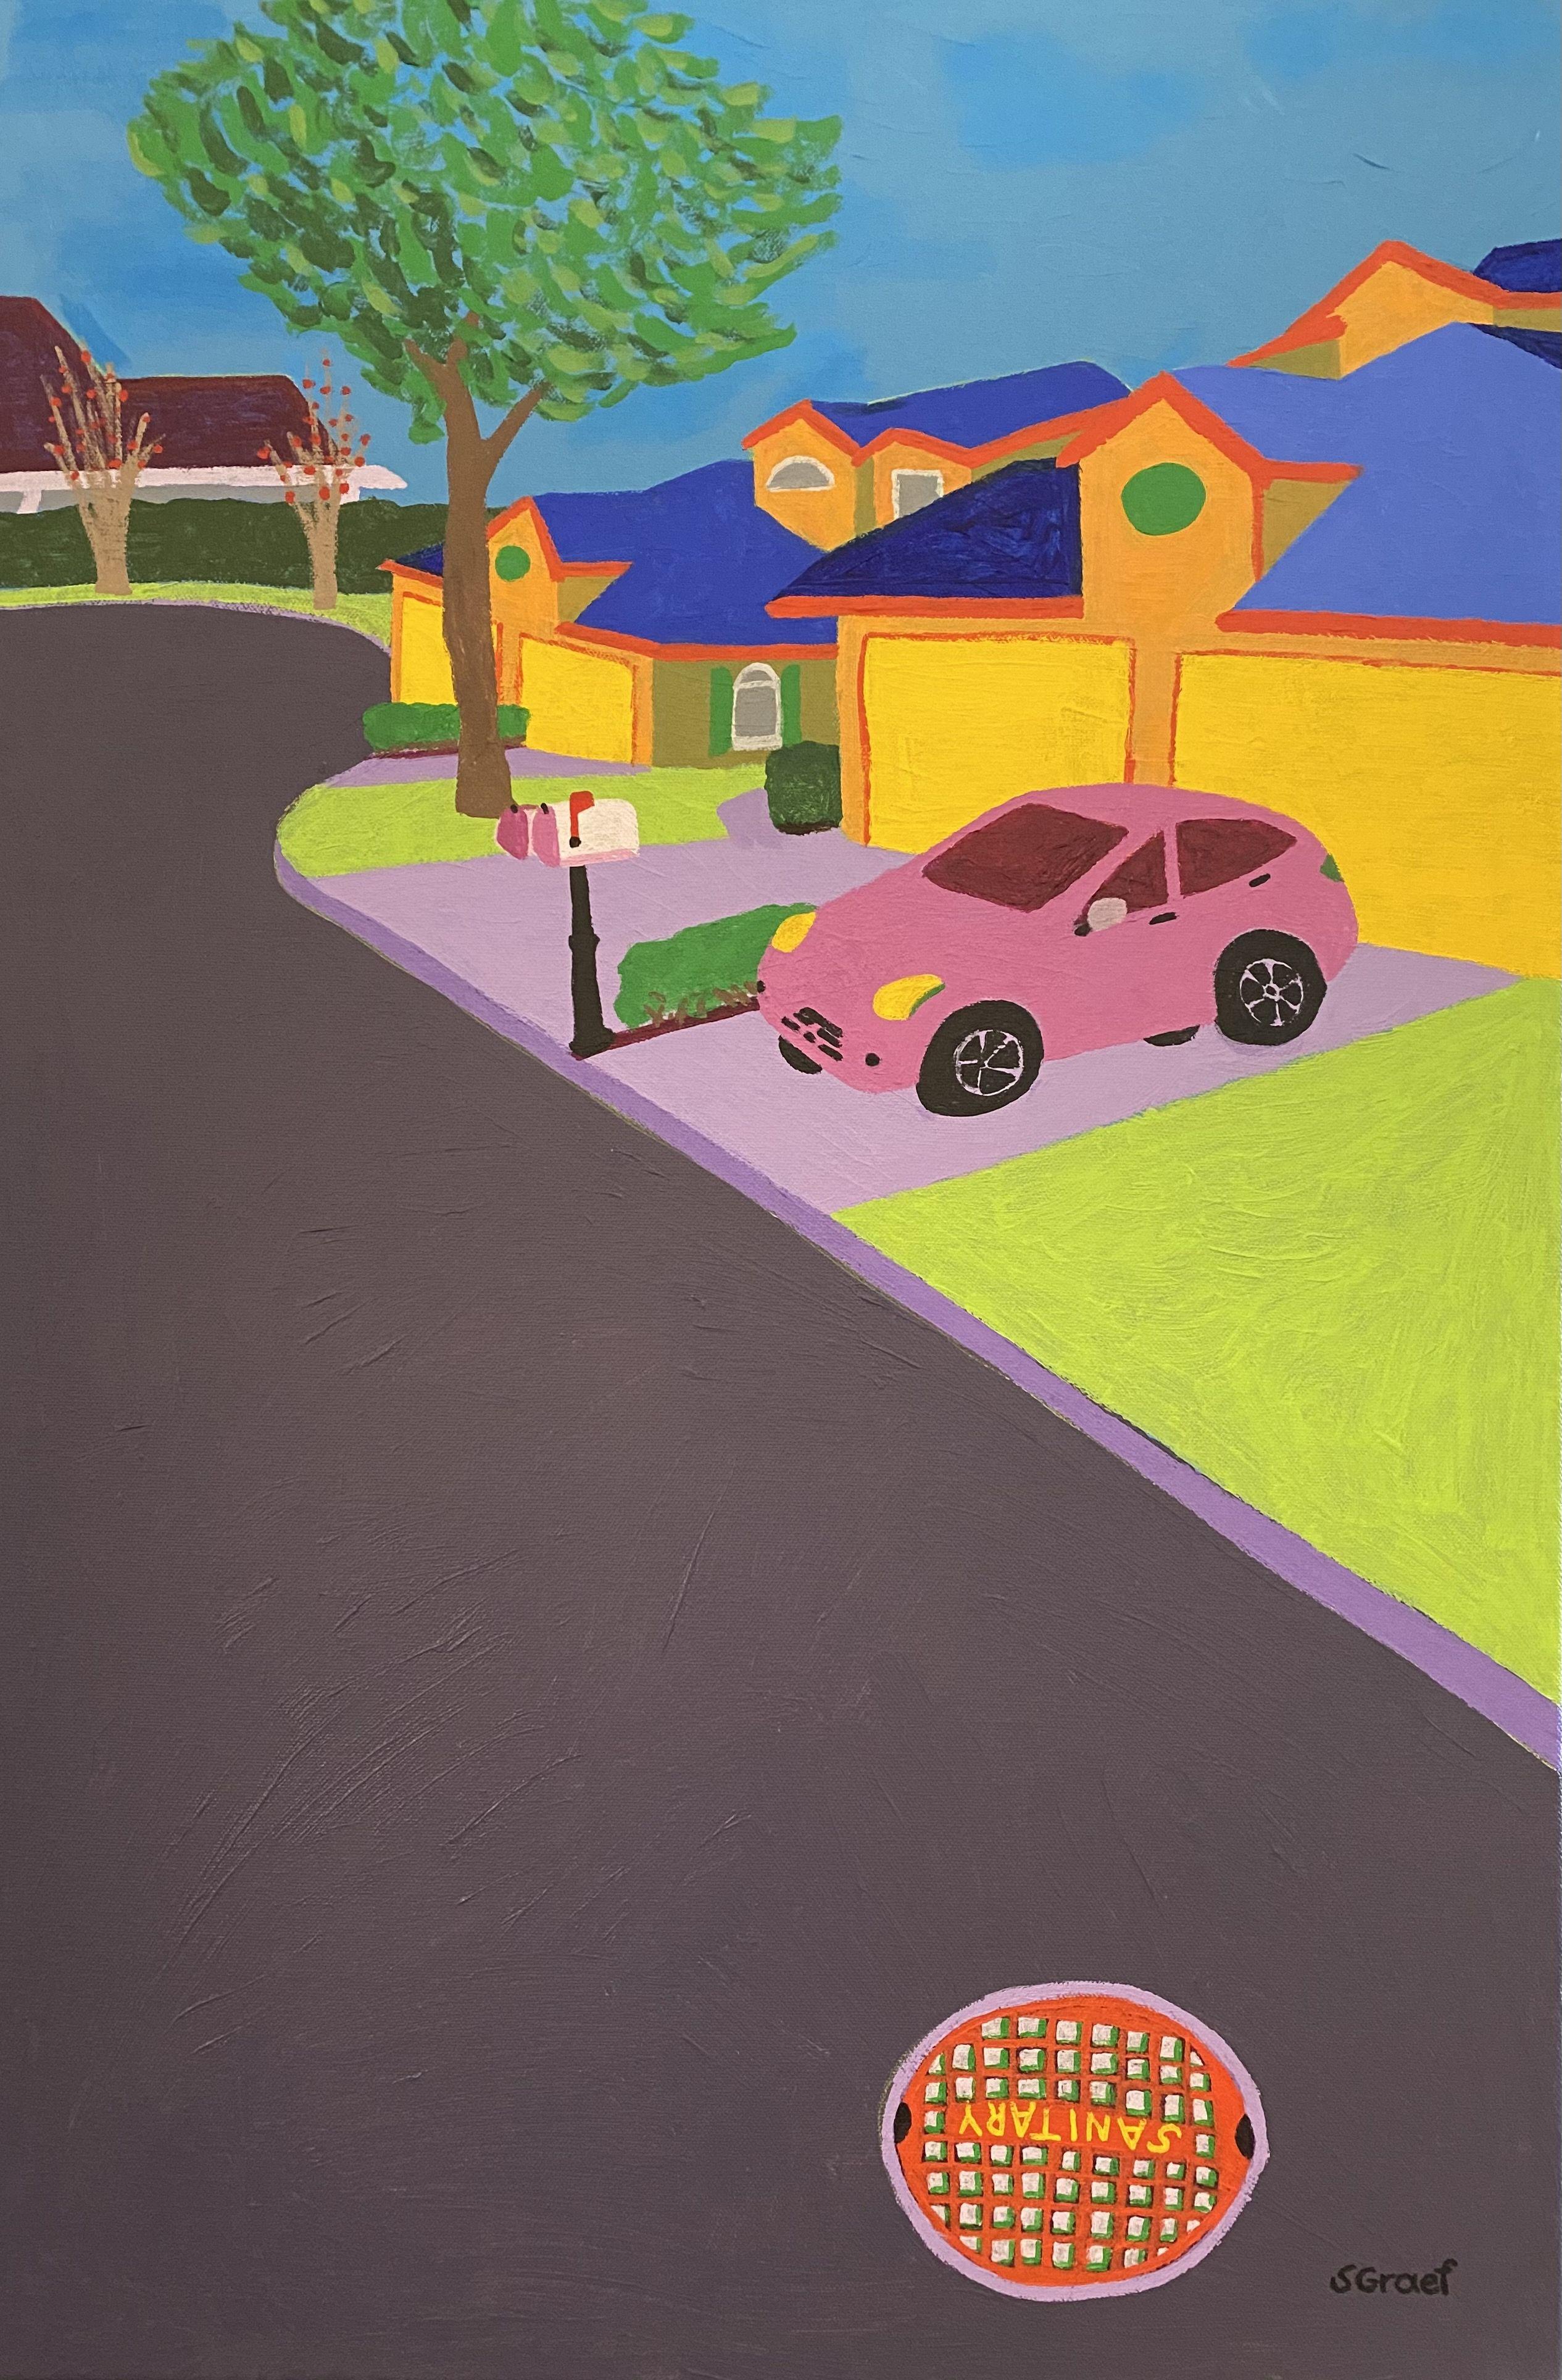 Second in the series of three Jacob Court paintings, this one follows with a brilliant sky and a bold pinkish car. It is another view of the street where I live.  The painting measures 30 x 20 x 1.5 inches, is unframed with neatly painted edges and